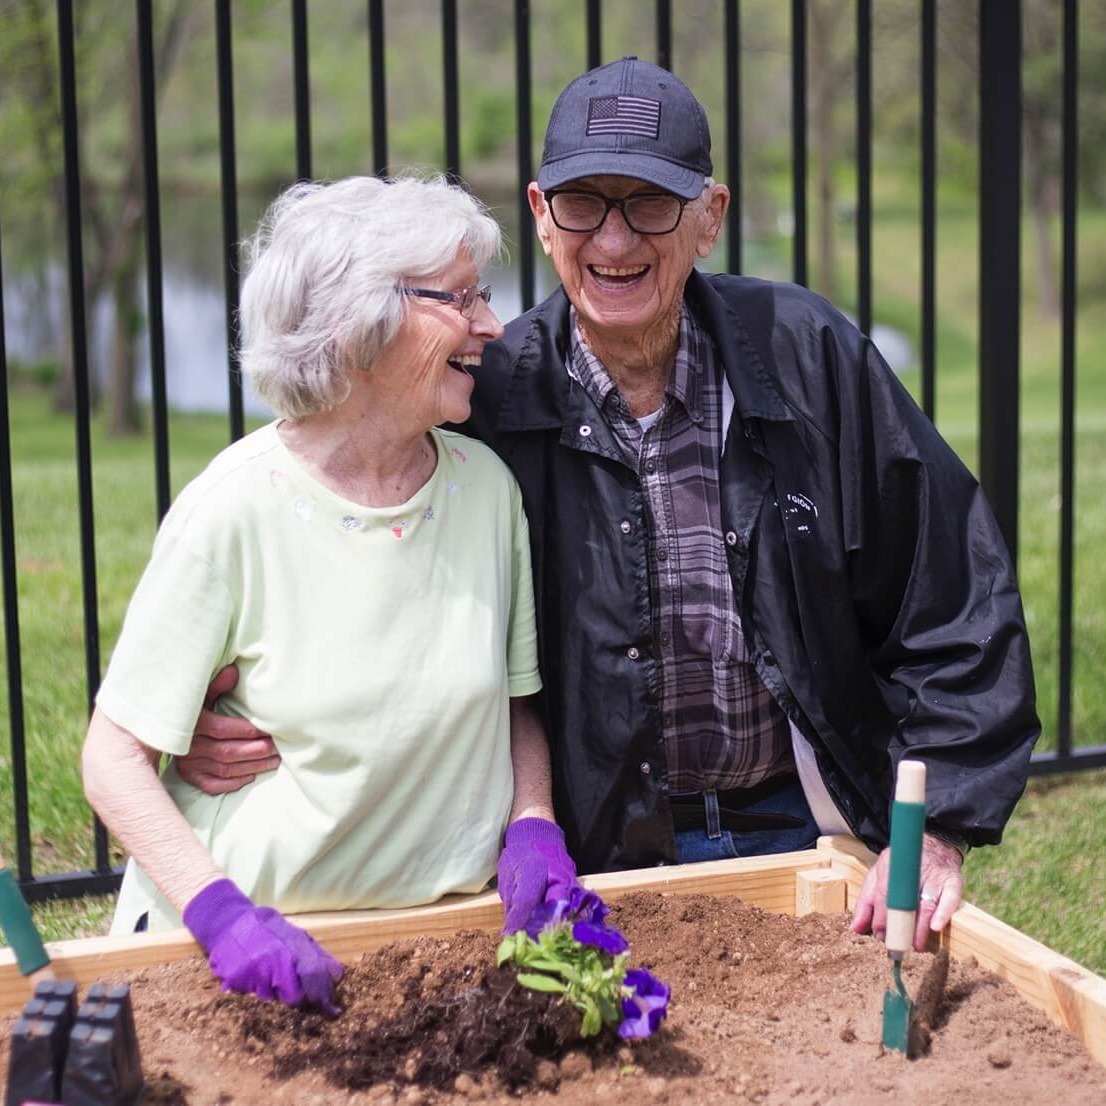 Resident couple smiling and gardening